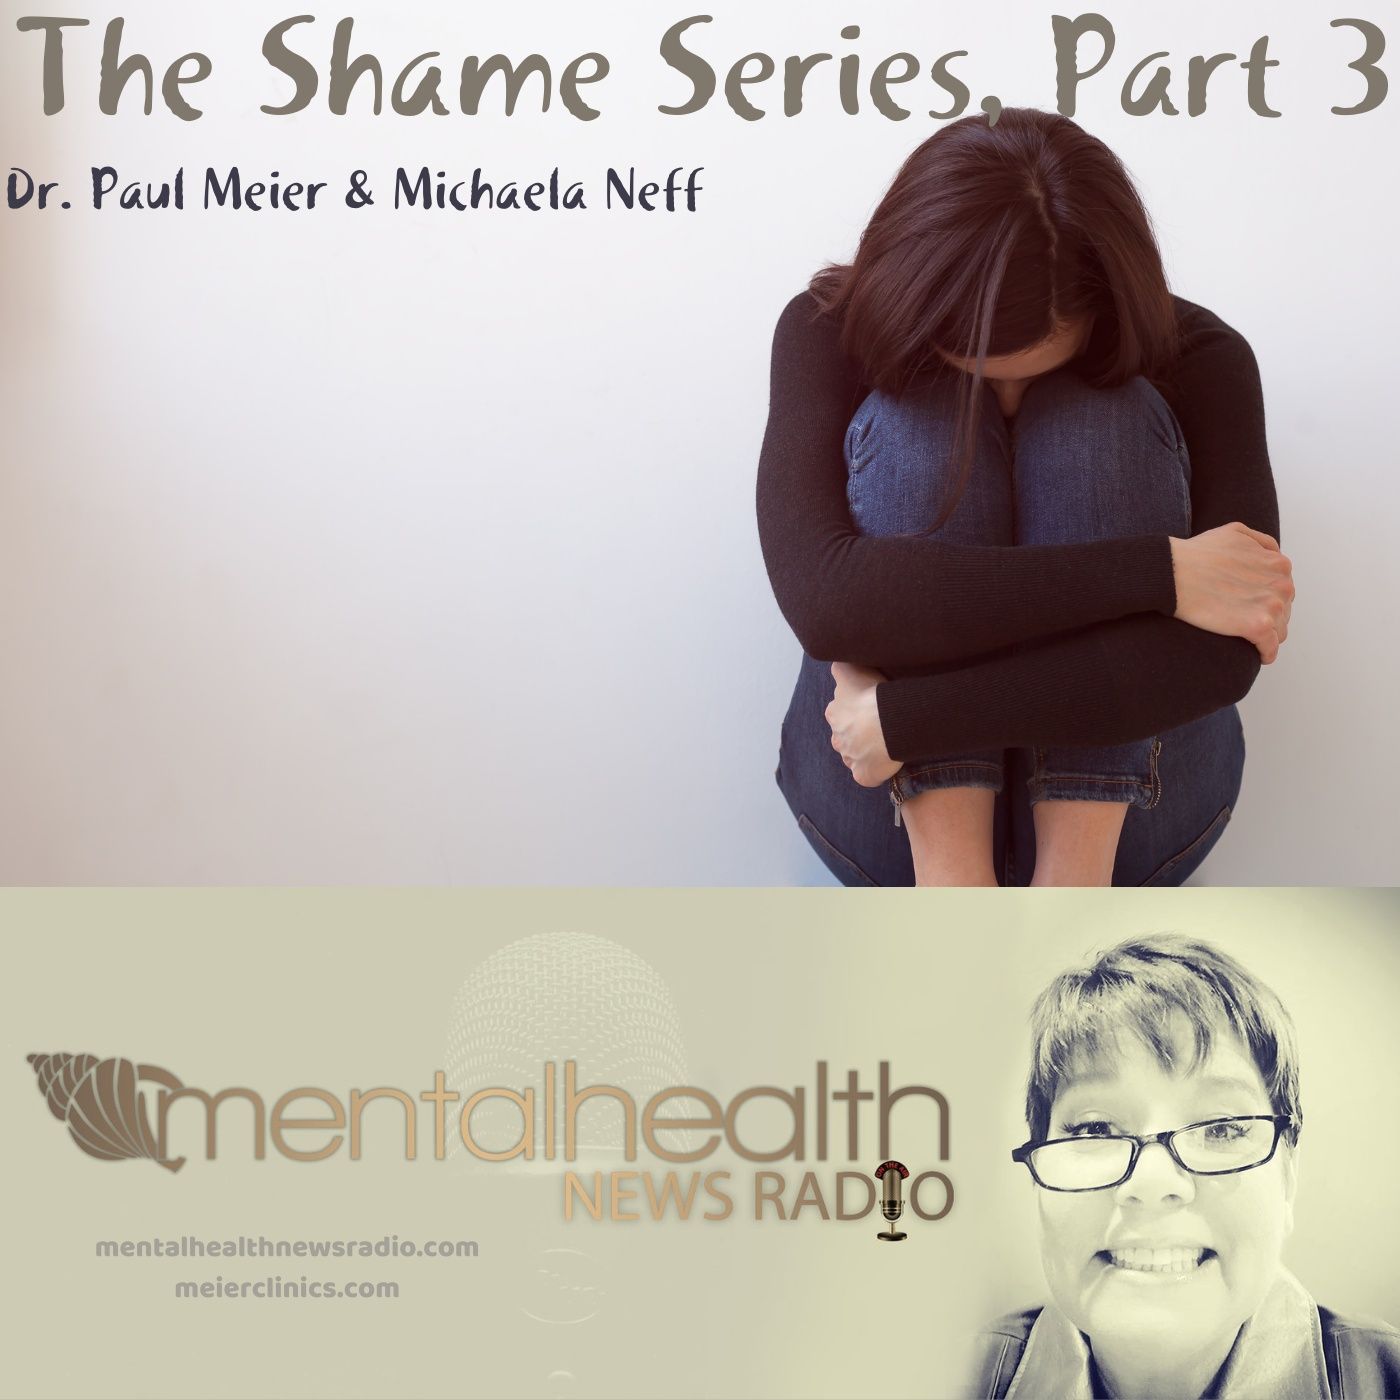 The Shame Series with Dr. Paul Meier Part 3